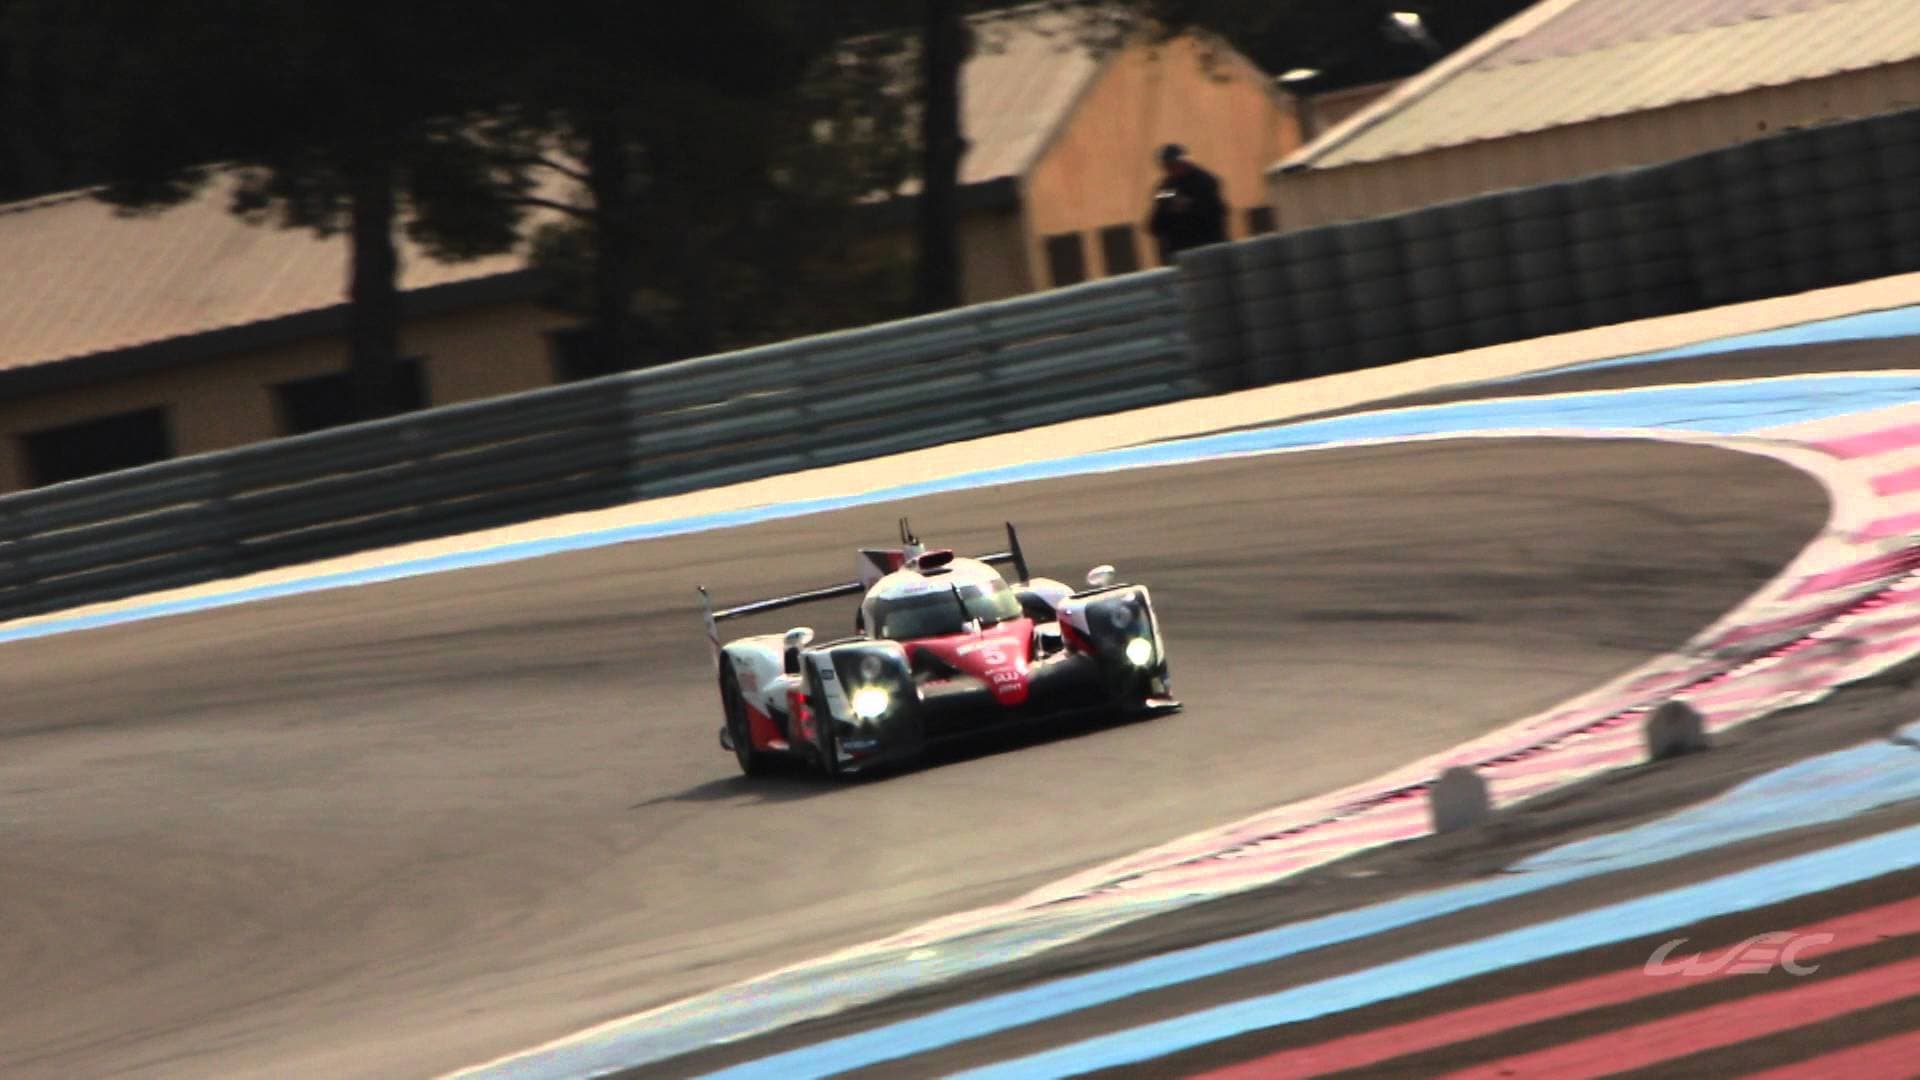 Toyota Says Hybrid Systems Aren’t Ready for LMP1 Yet